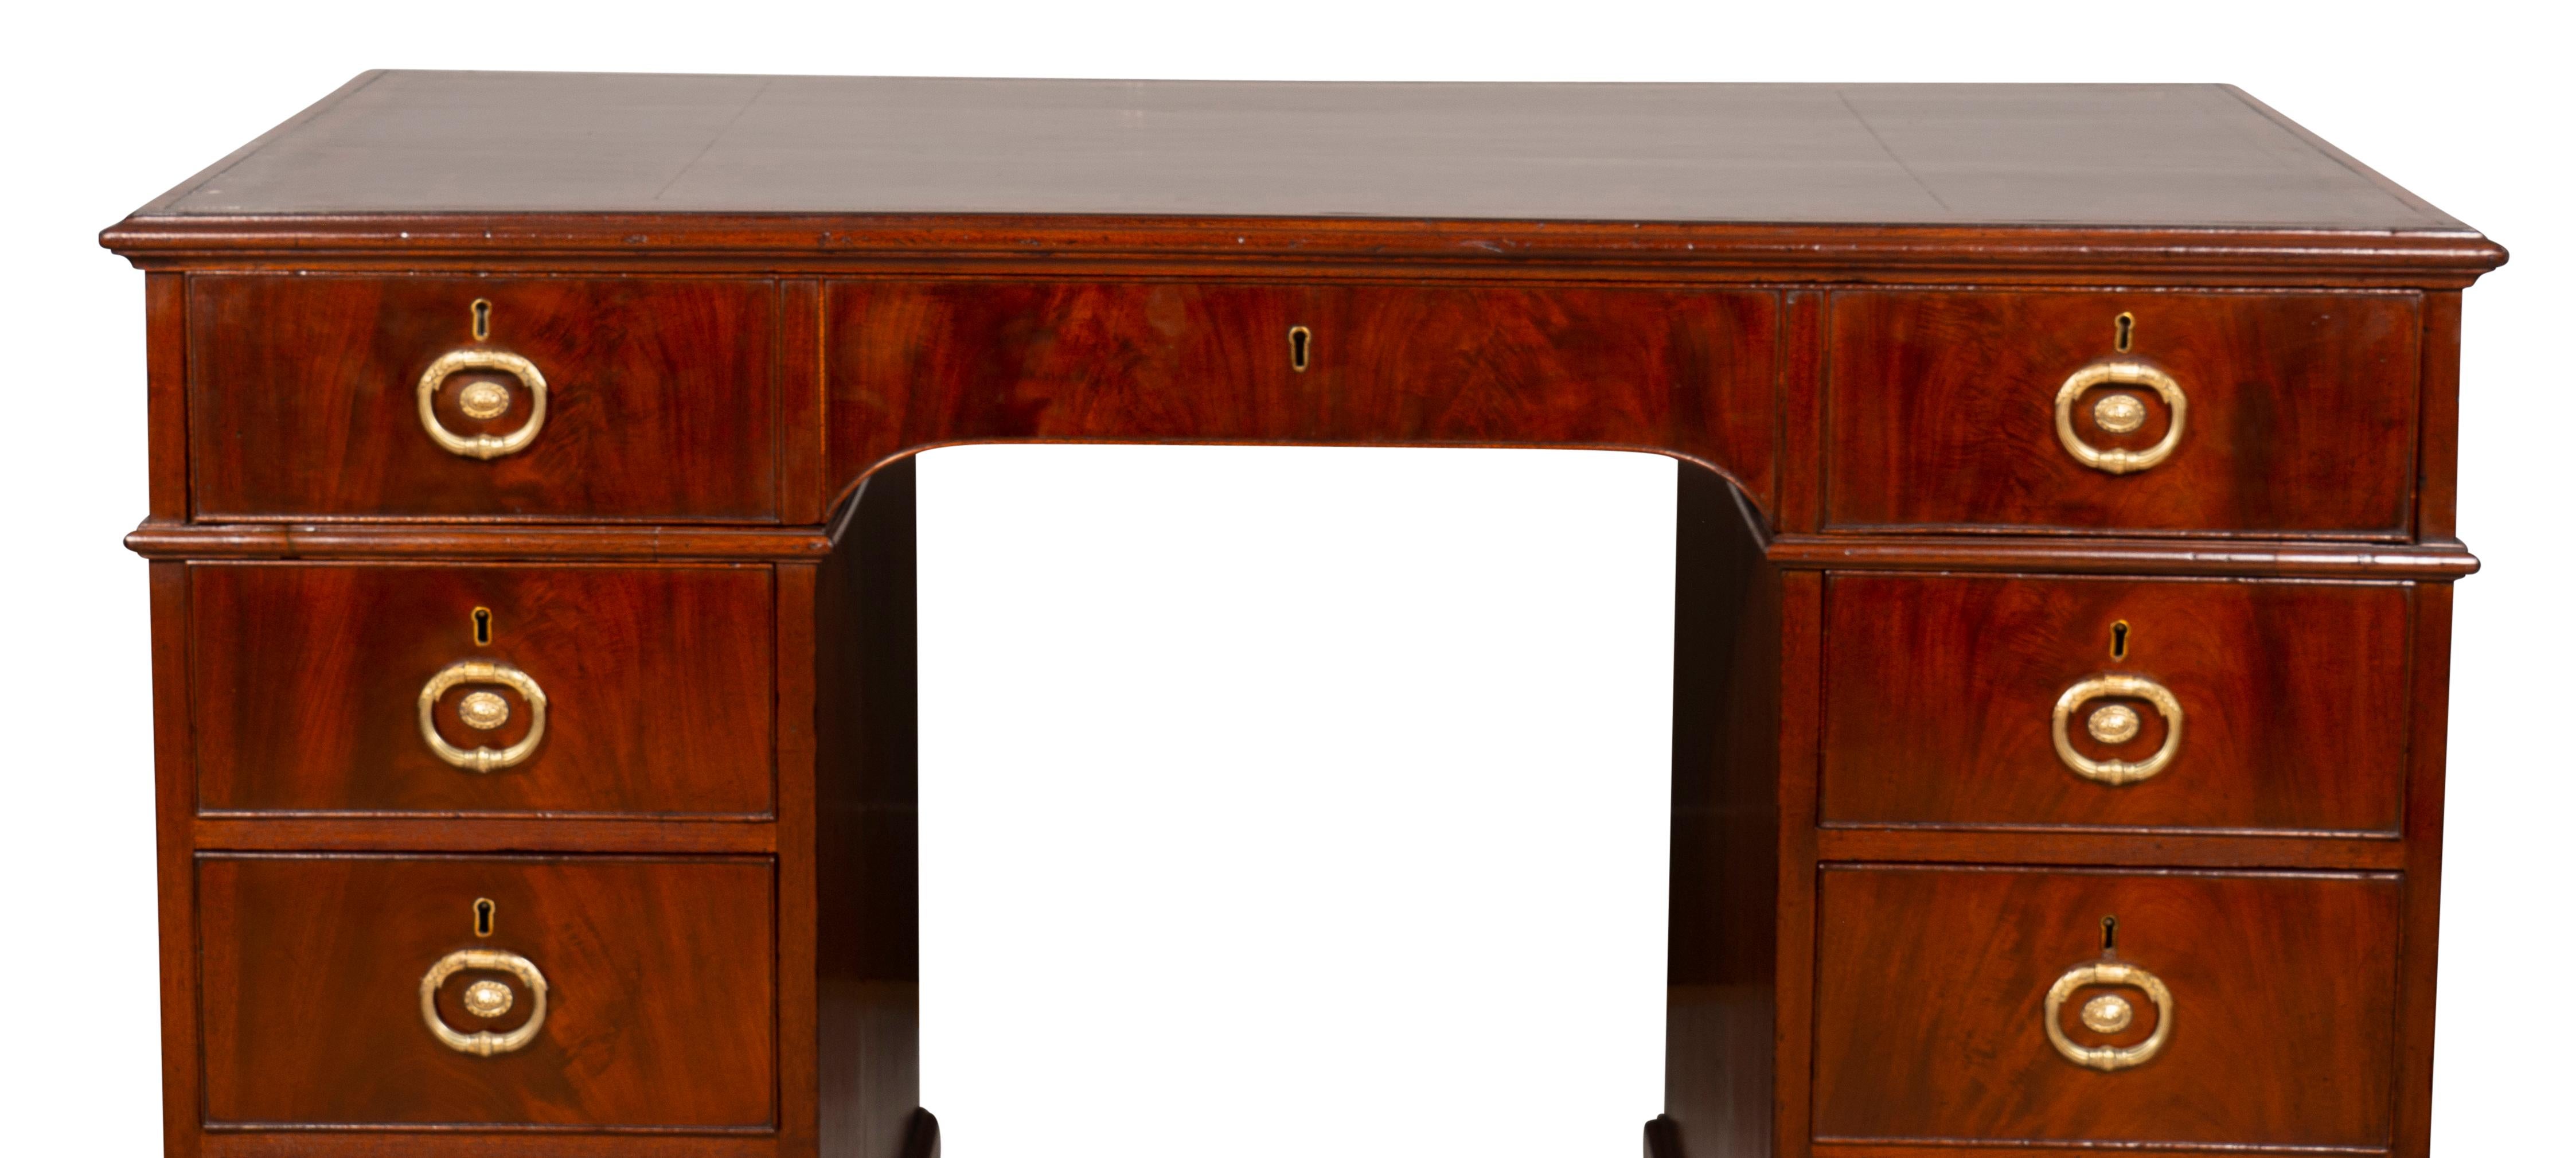 George III Mahogany Rent Desk by Gillows of Lancaster For Sale 14